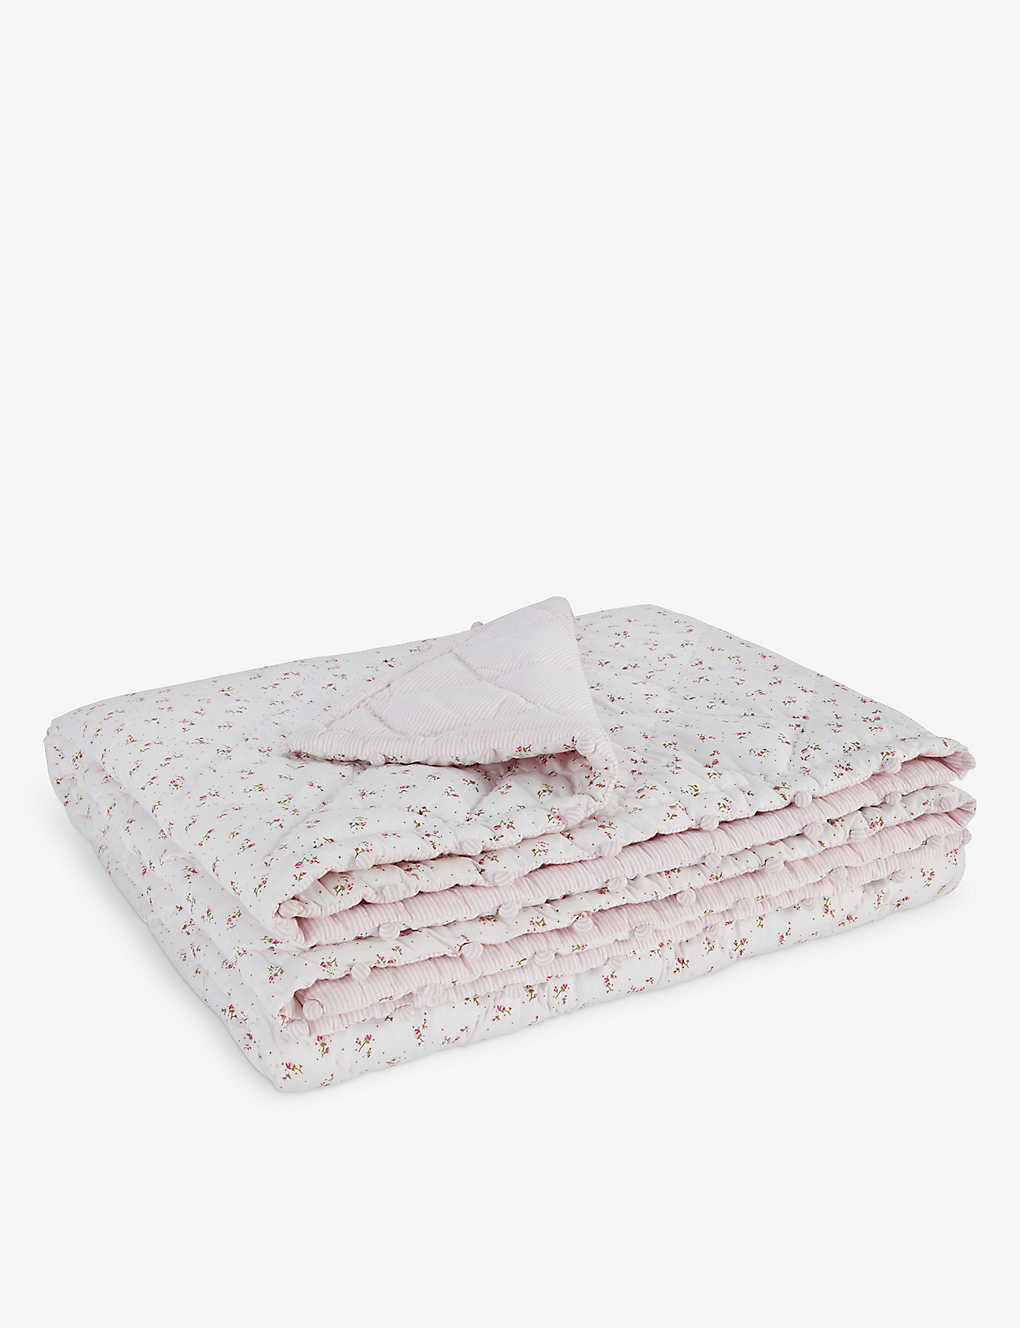 The Little White Company Pink Reversible Floral-print Cotton Cot Bed Bedspread